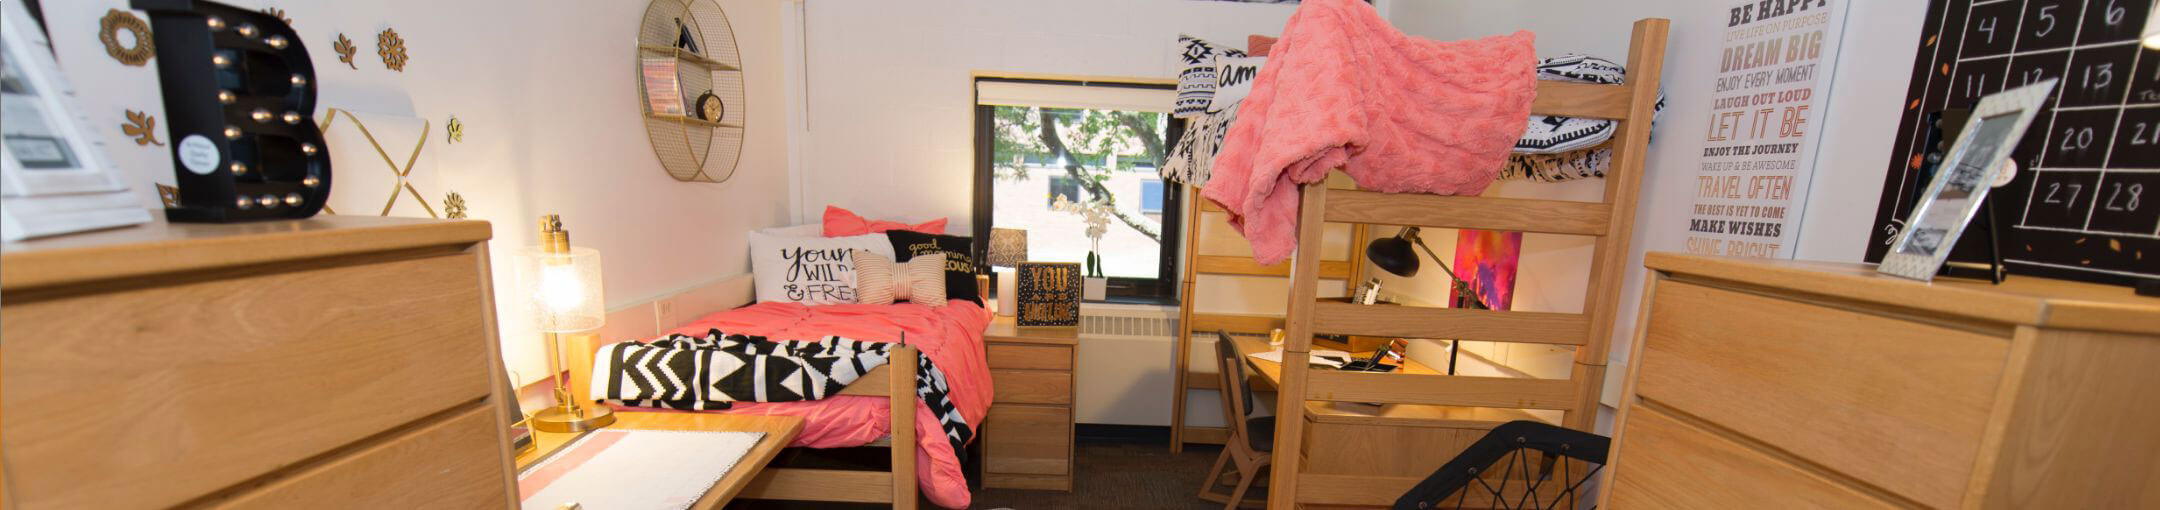 The interior of an R I T student's dorm room.